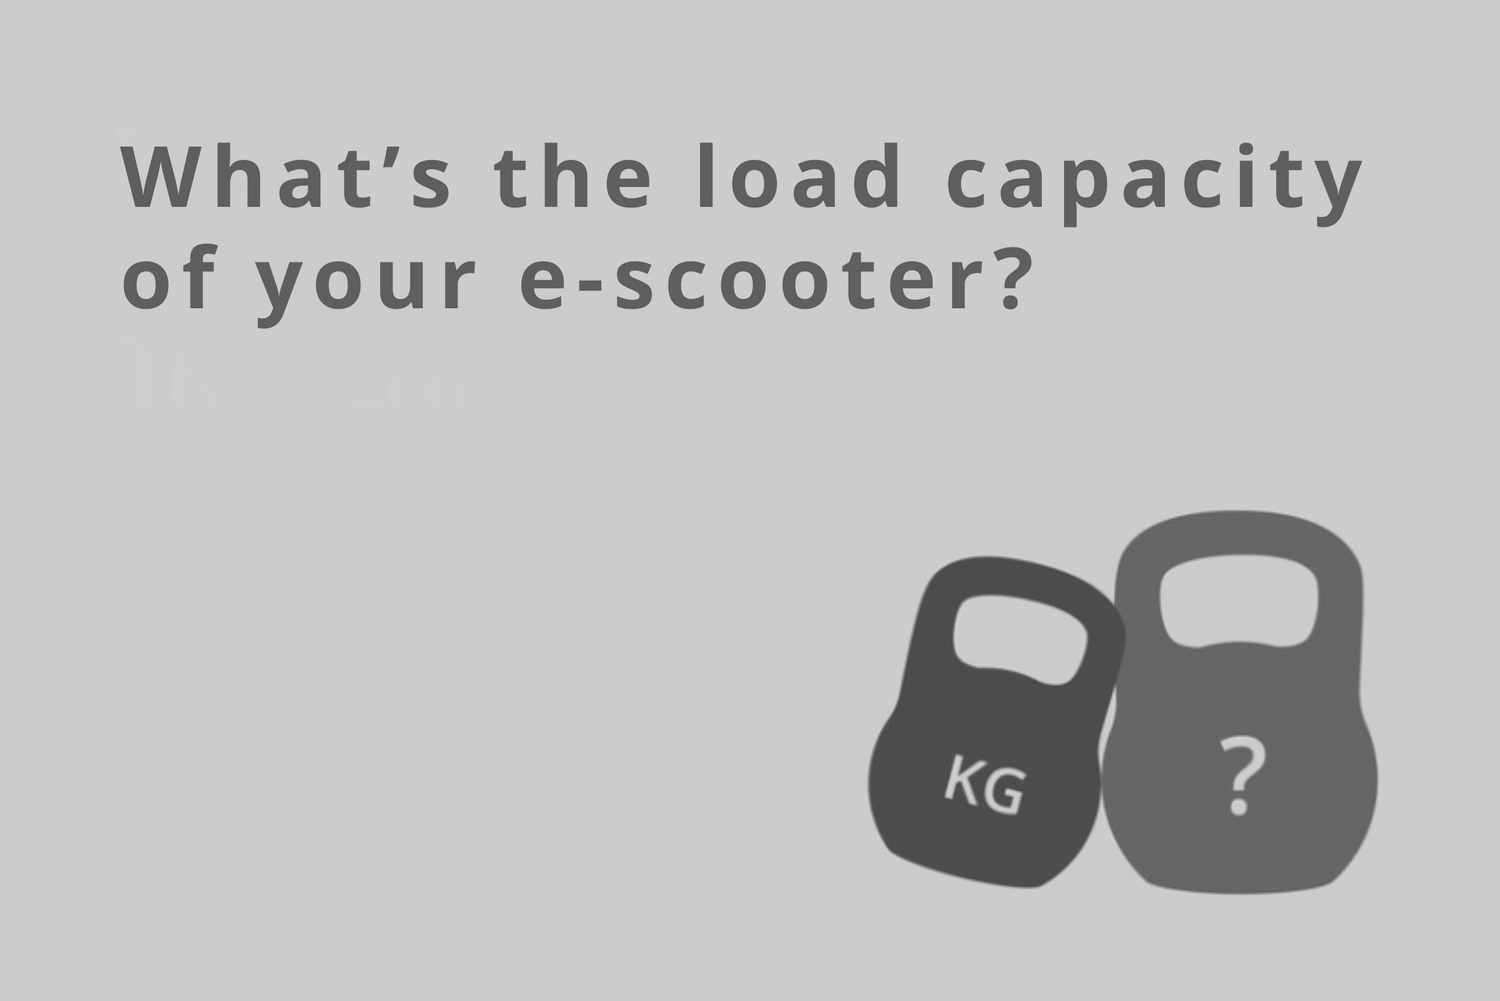 HOW MUCH WEIGHT CAN YOUR E-SCOOTER CARRY?